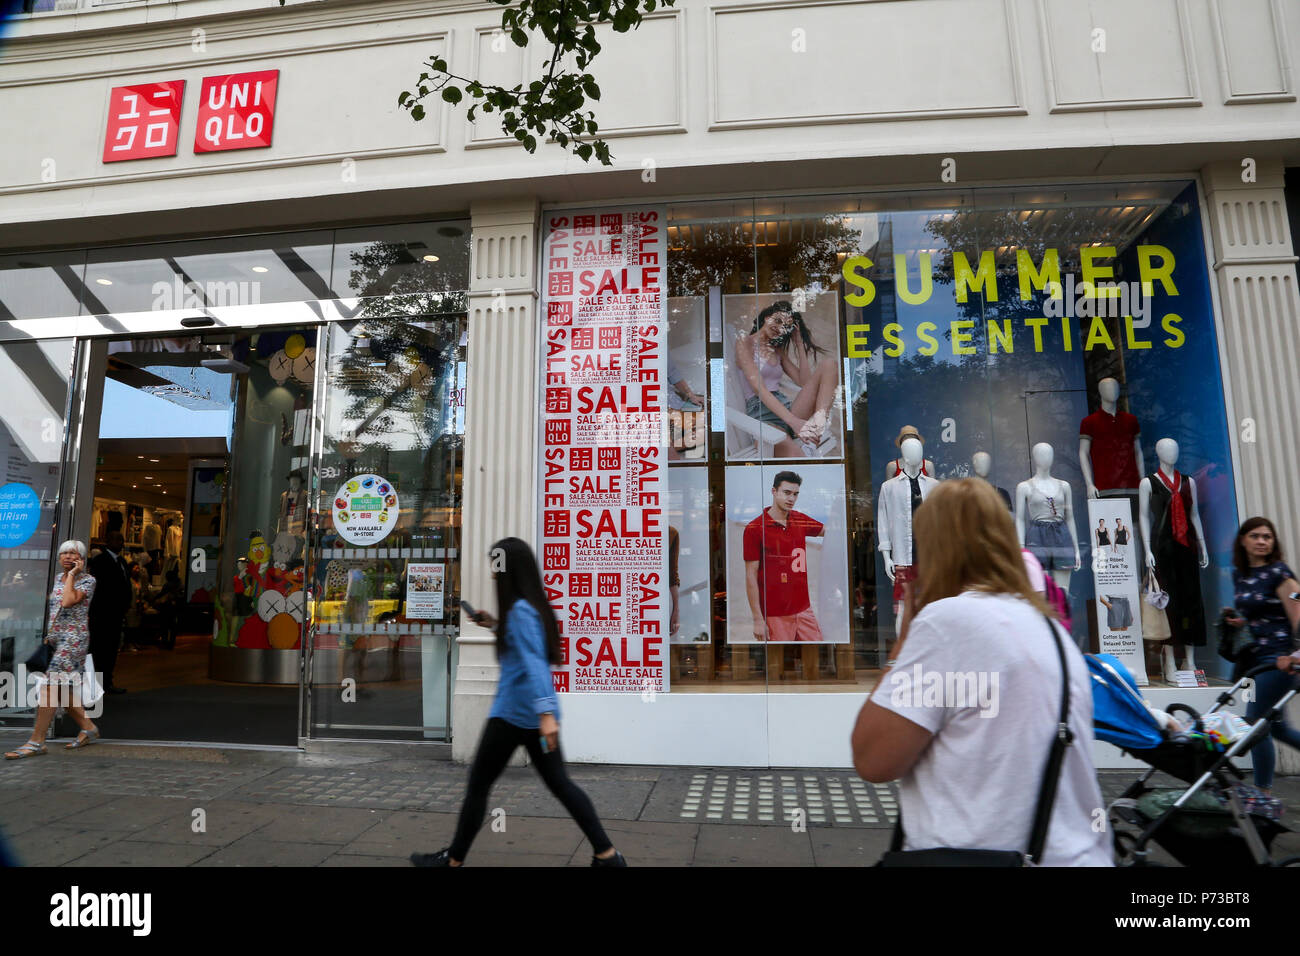 Uniqlo Window Display High Resolution Stock Photography and Images - Alamy